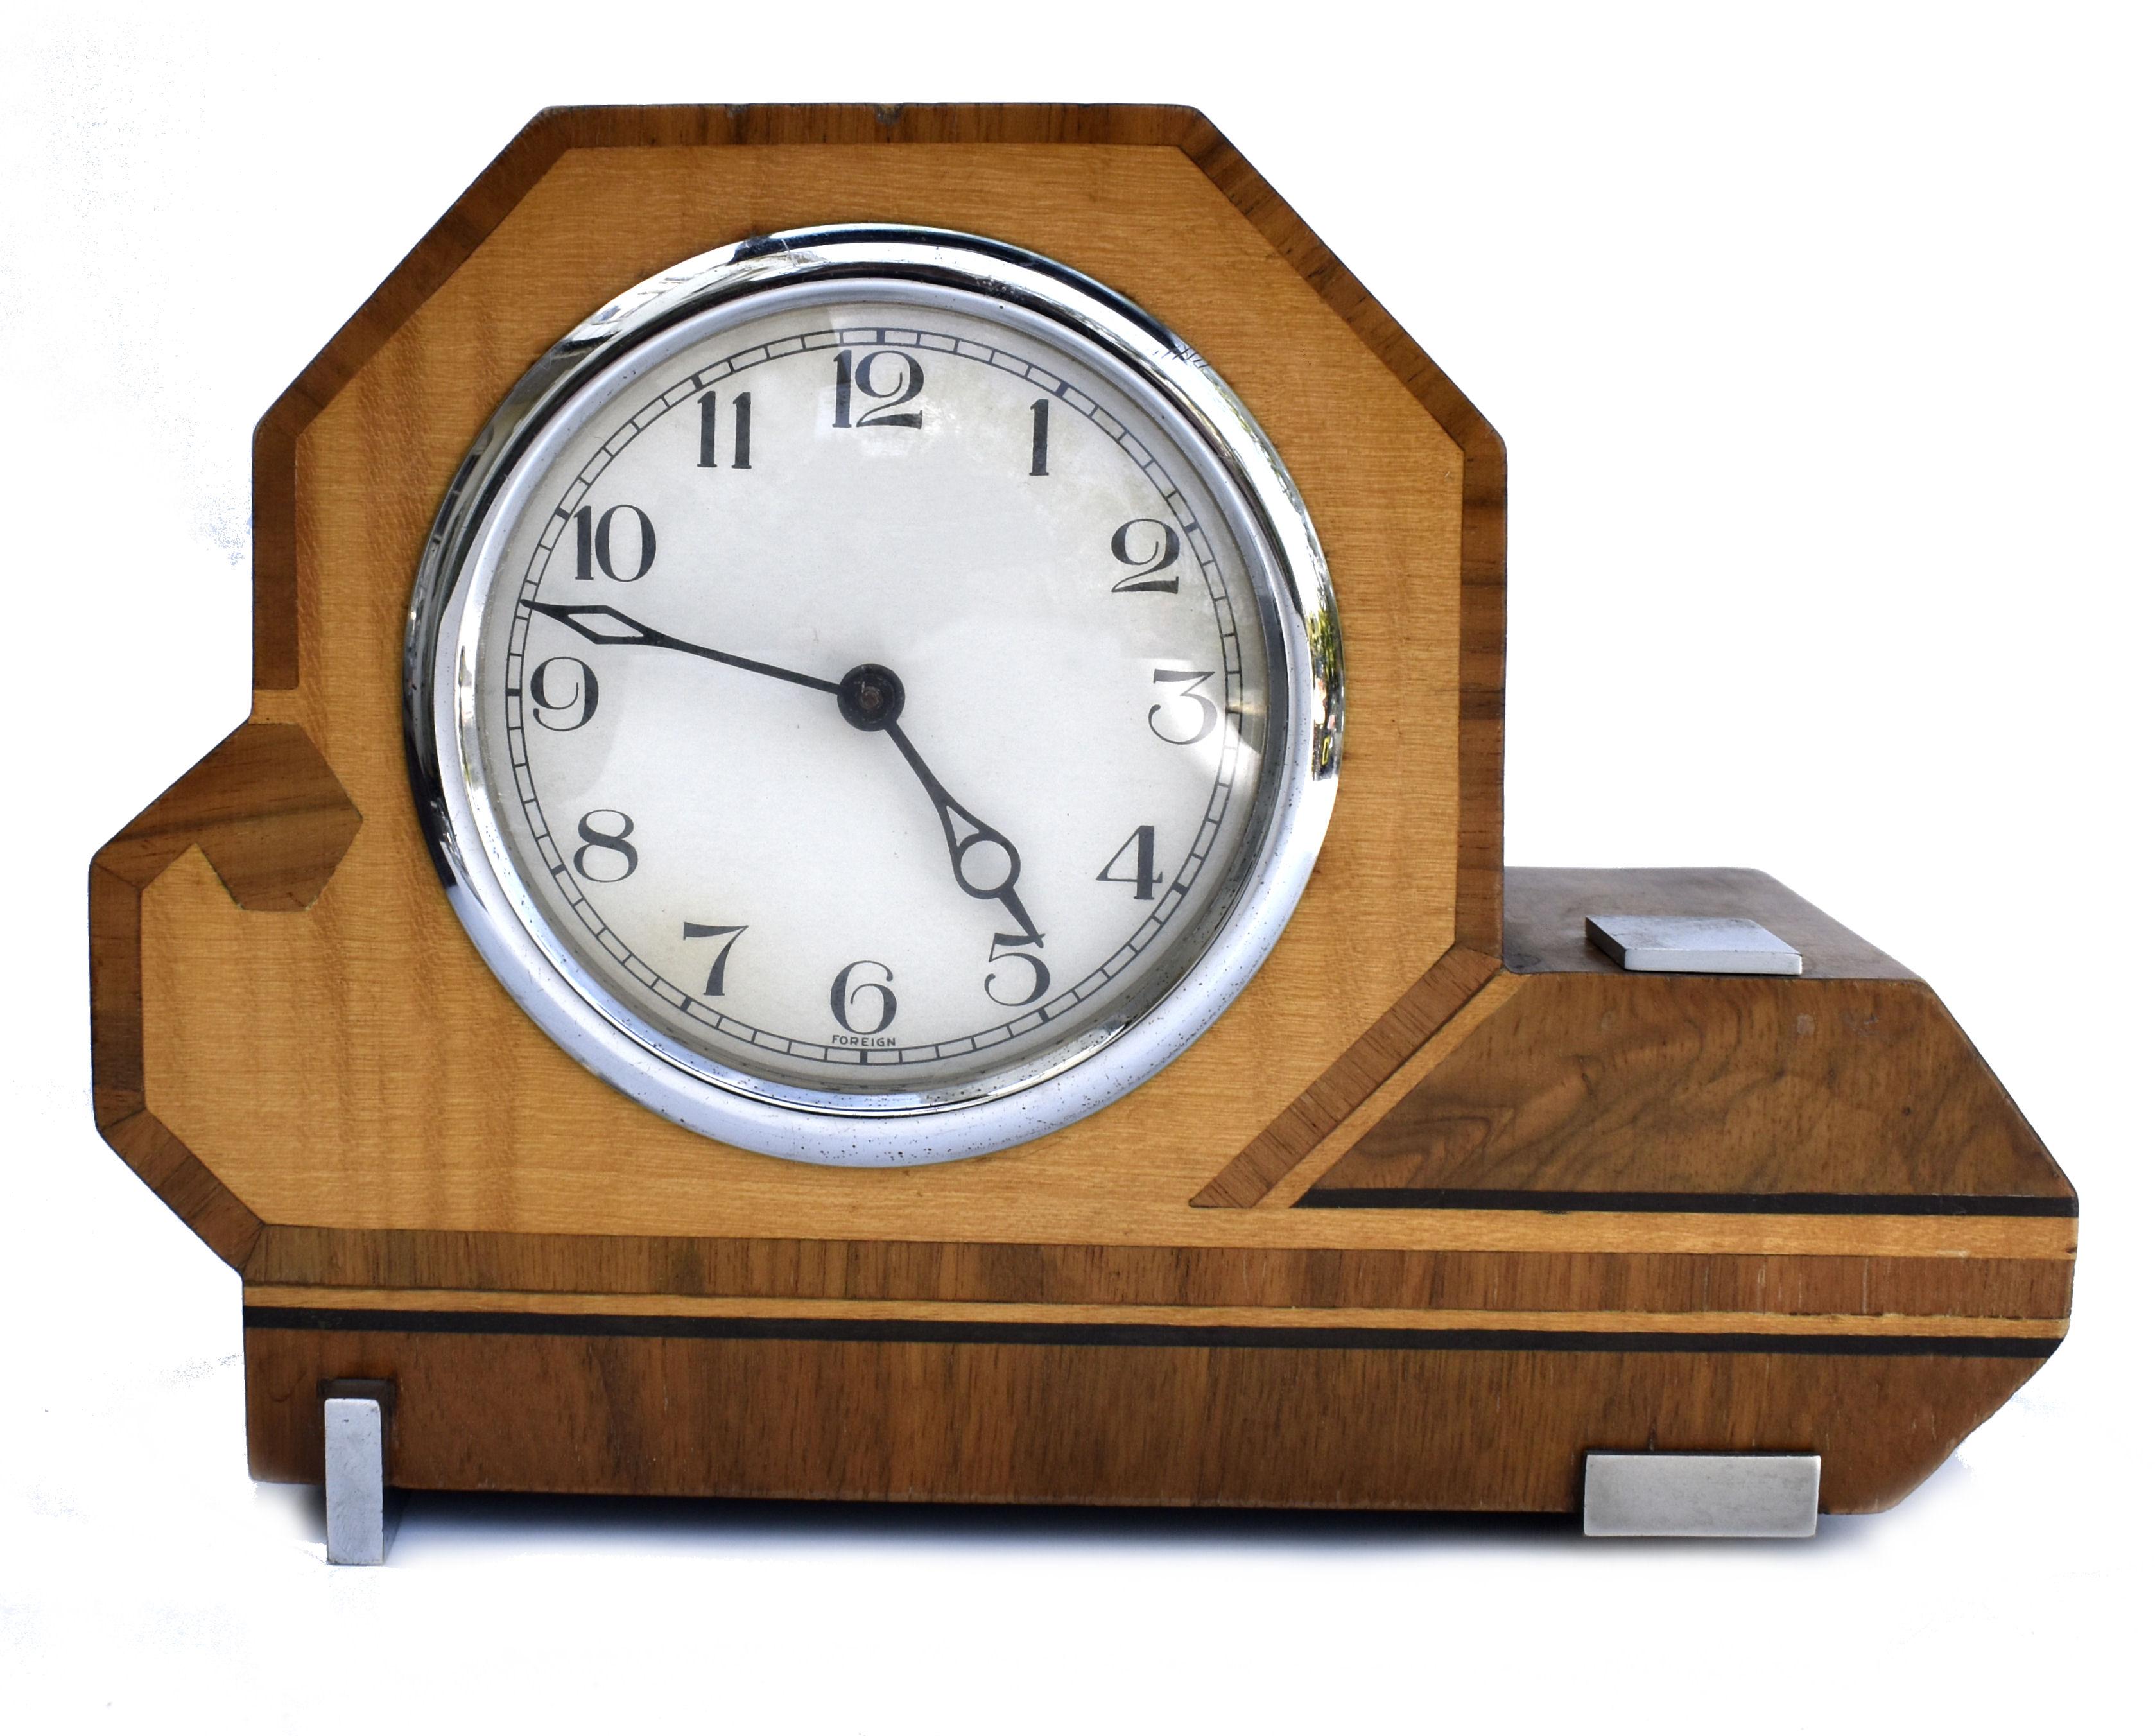 Art Deco Geometric Two Tone Wooden Mantle Clock. - Amazing Rare Shape.
The overall condition is very good. Fully serviced and working well. Wonderful shape, very indicative of this era. Chrome accents add to the appeal. Audible tick but not very